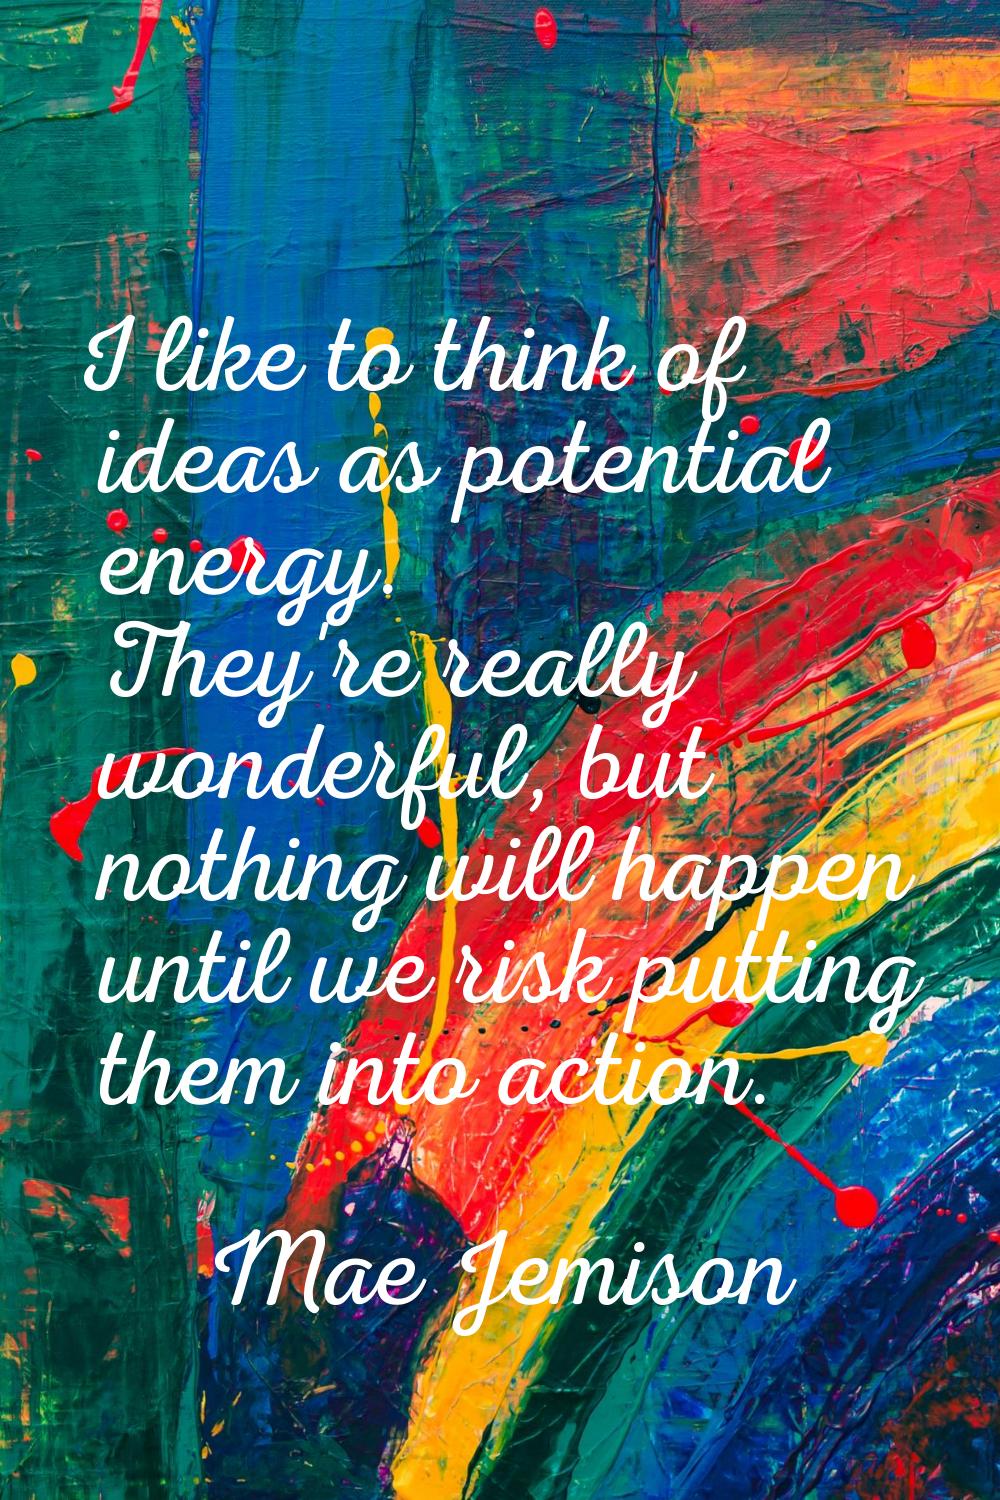 I like to think of ideas as potential energy. They're really wonderful, but nothing will happen unt